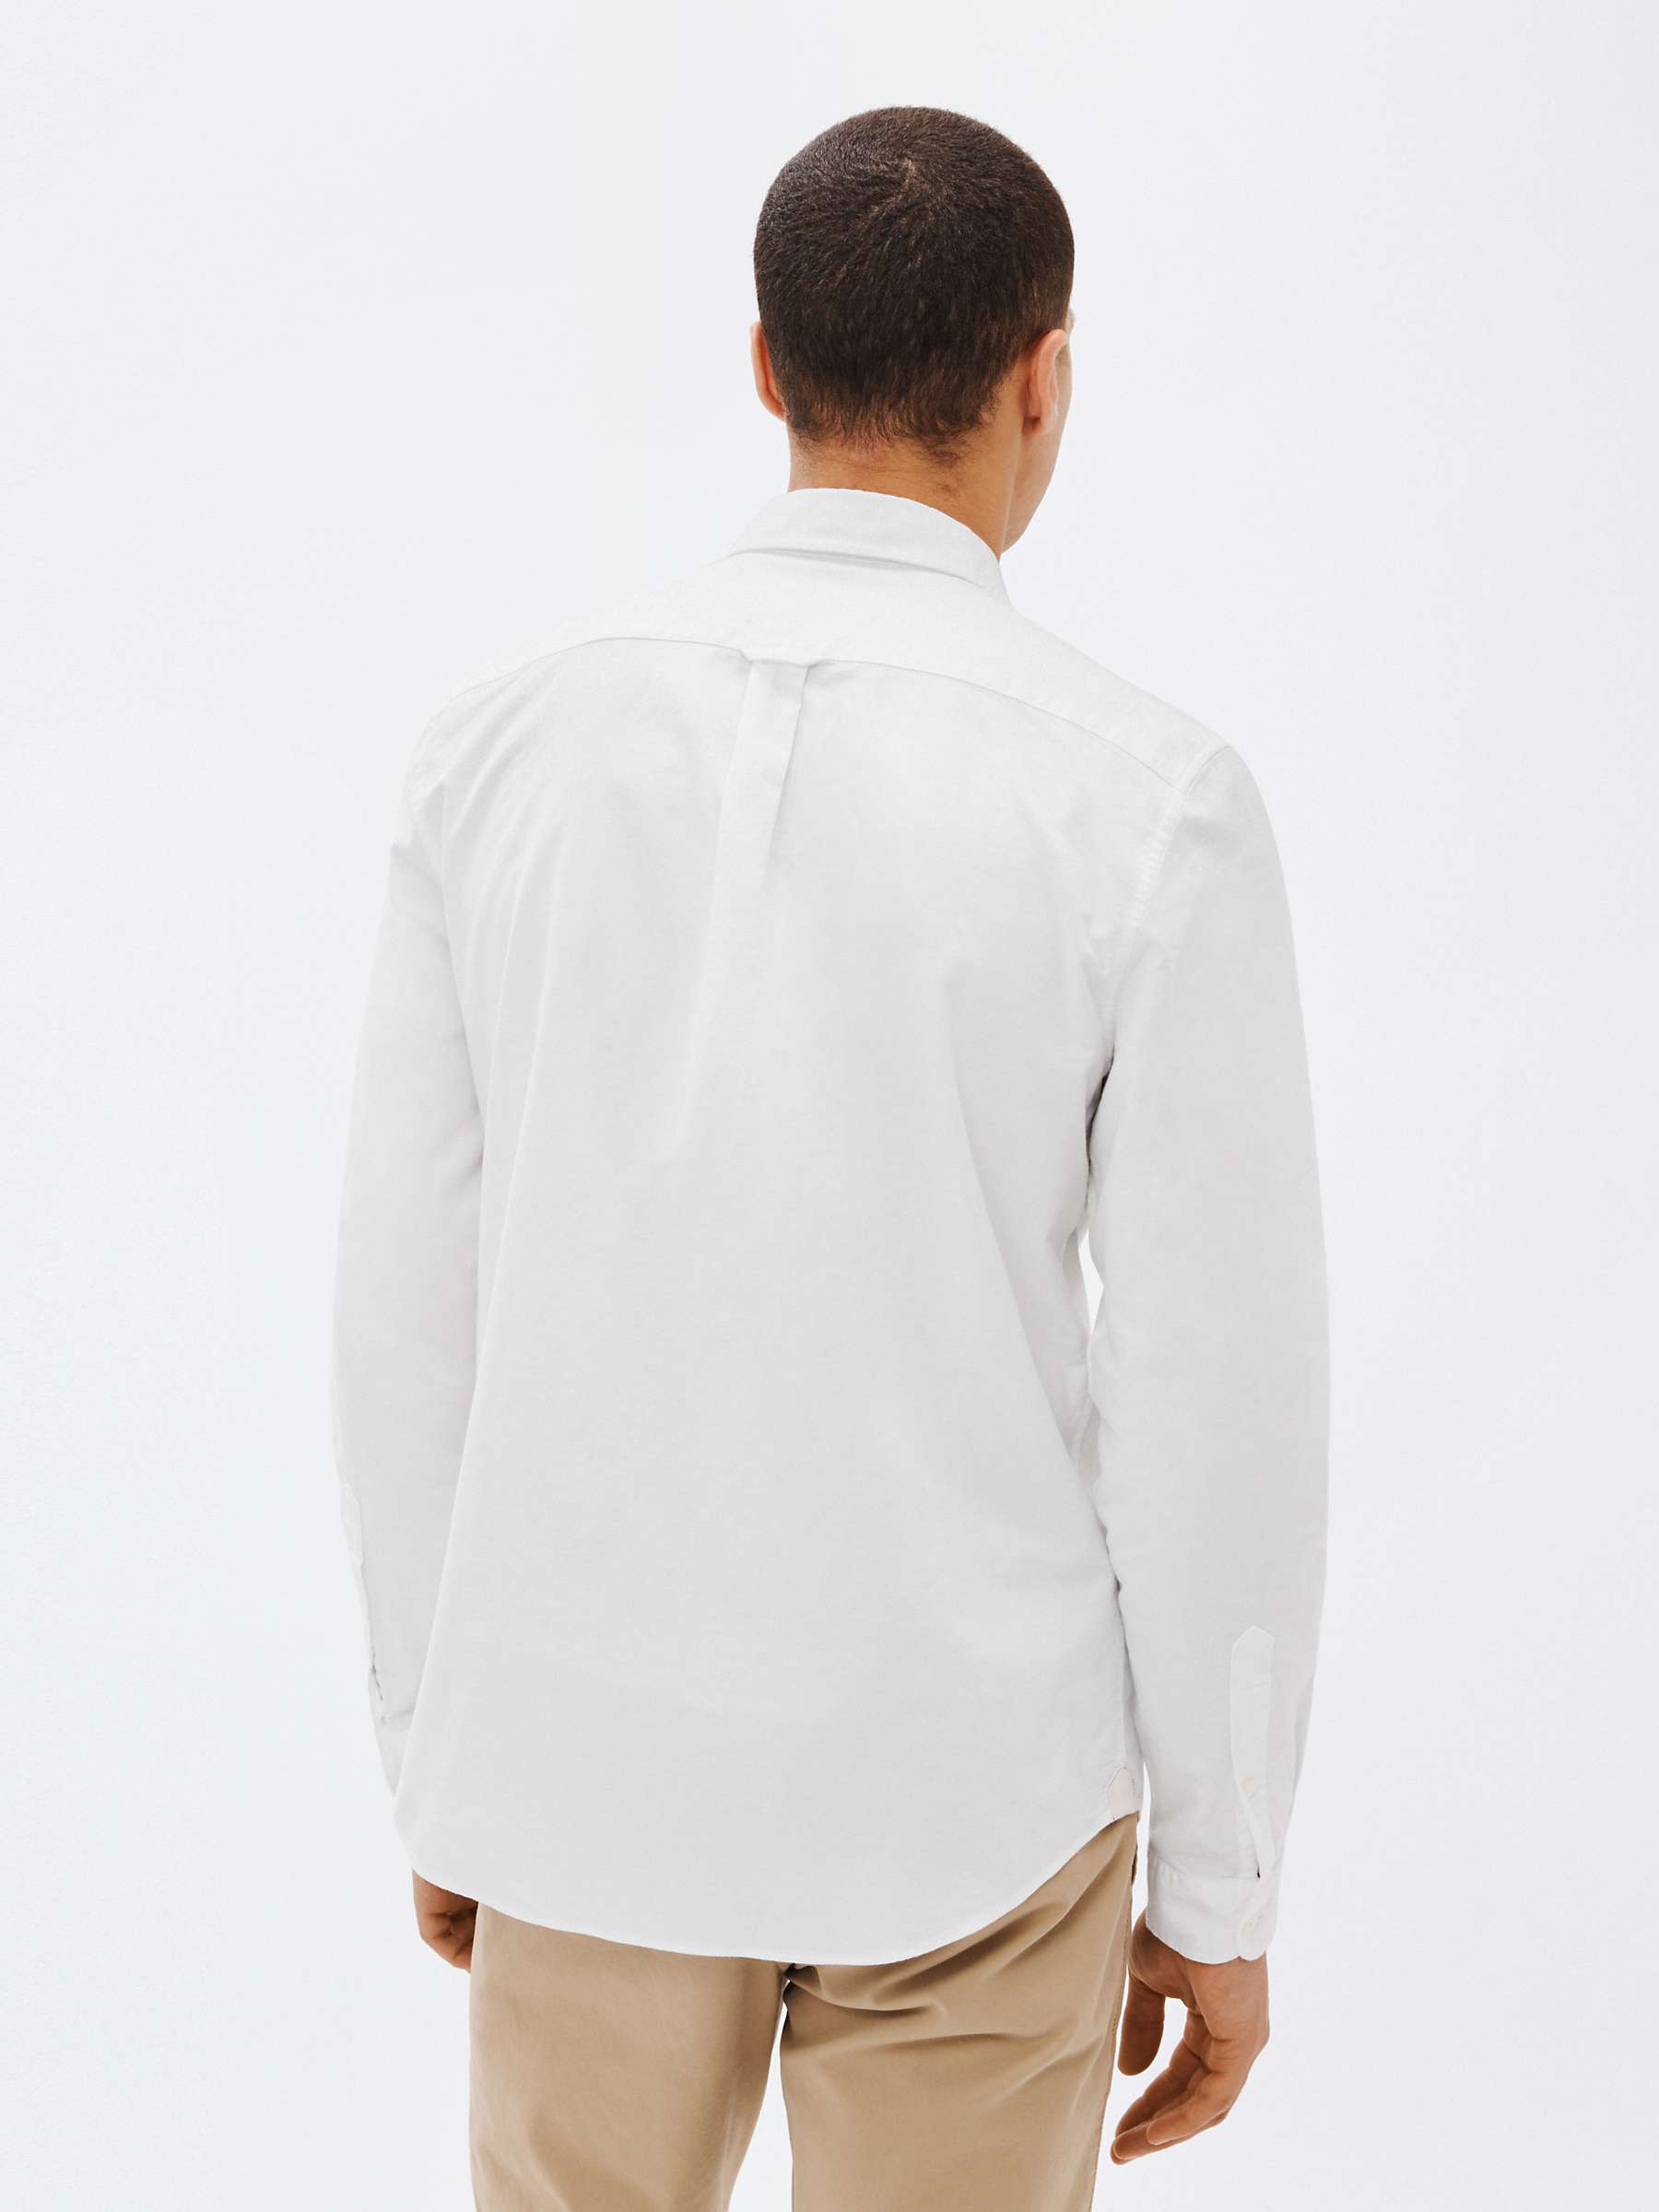 Buy Lacoste Buttoned Collar Oxford Shirt, C001 Online at johnlewis.com